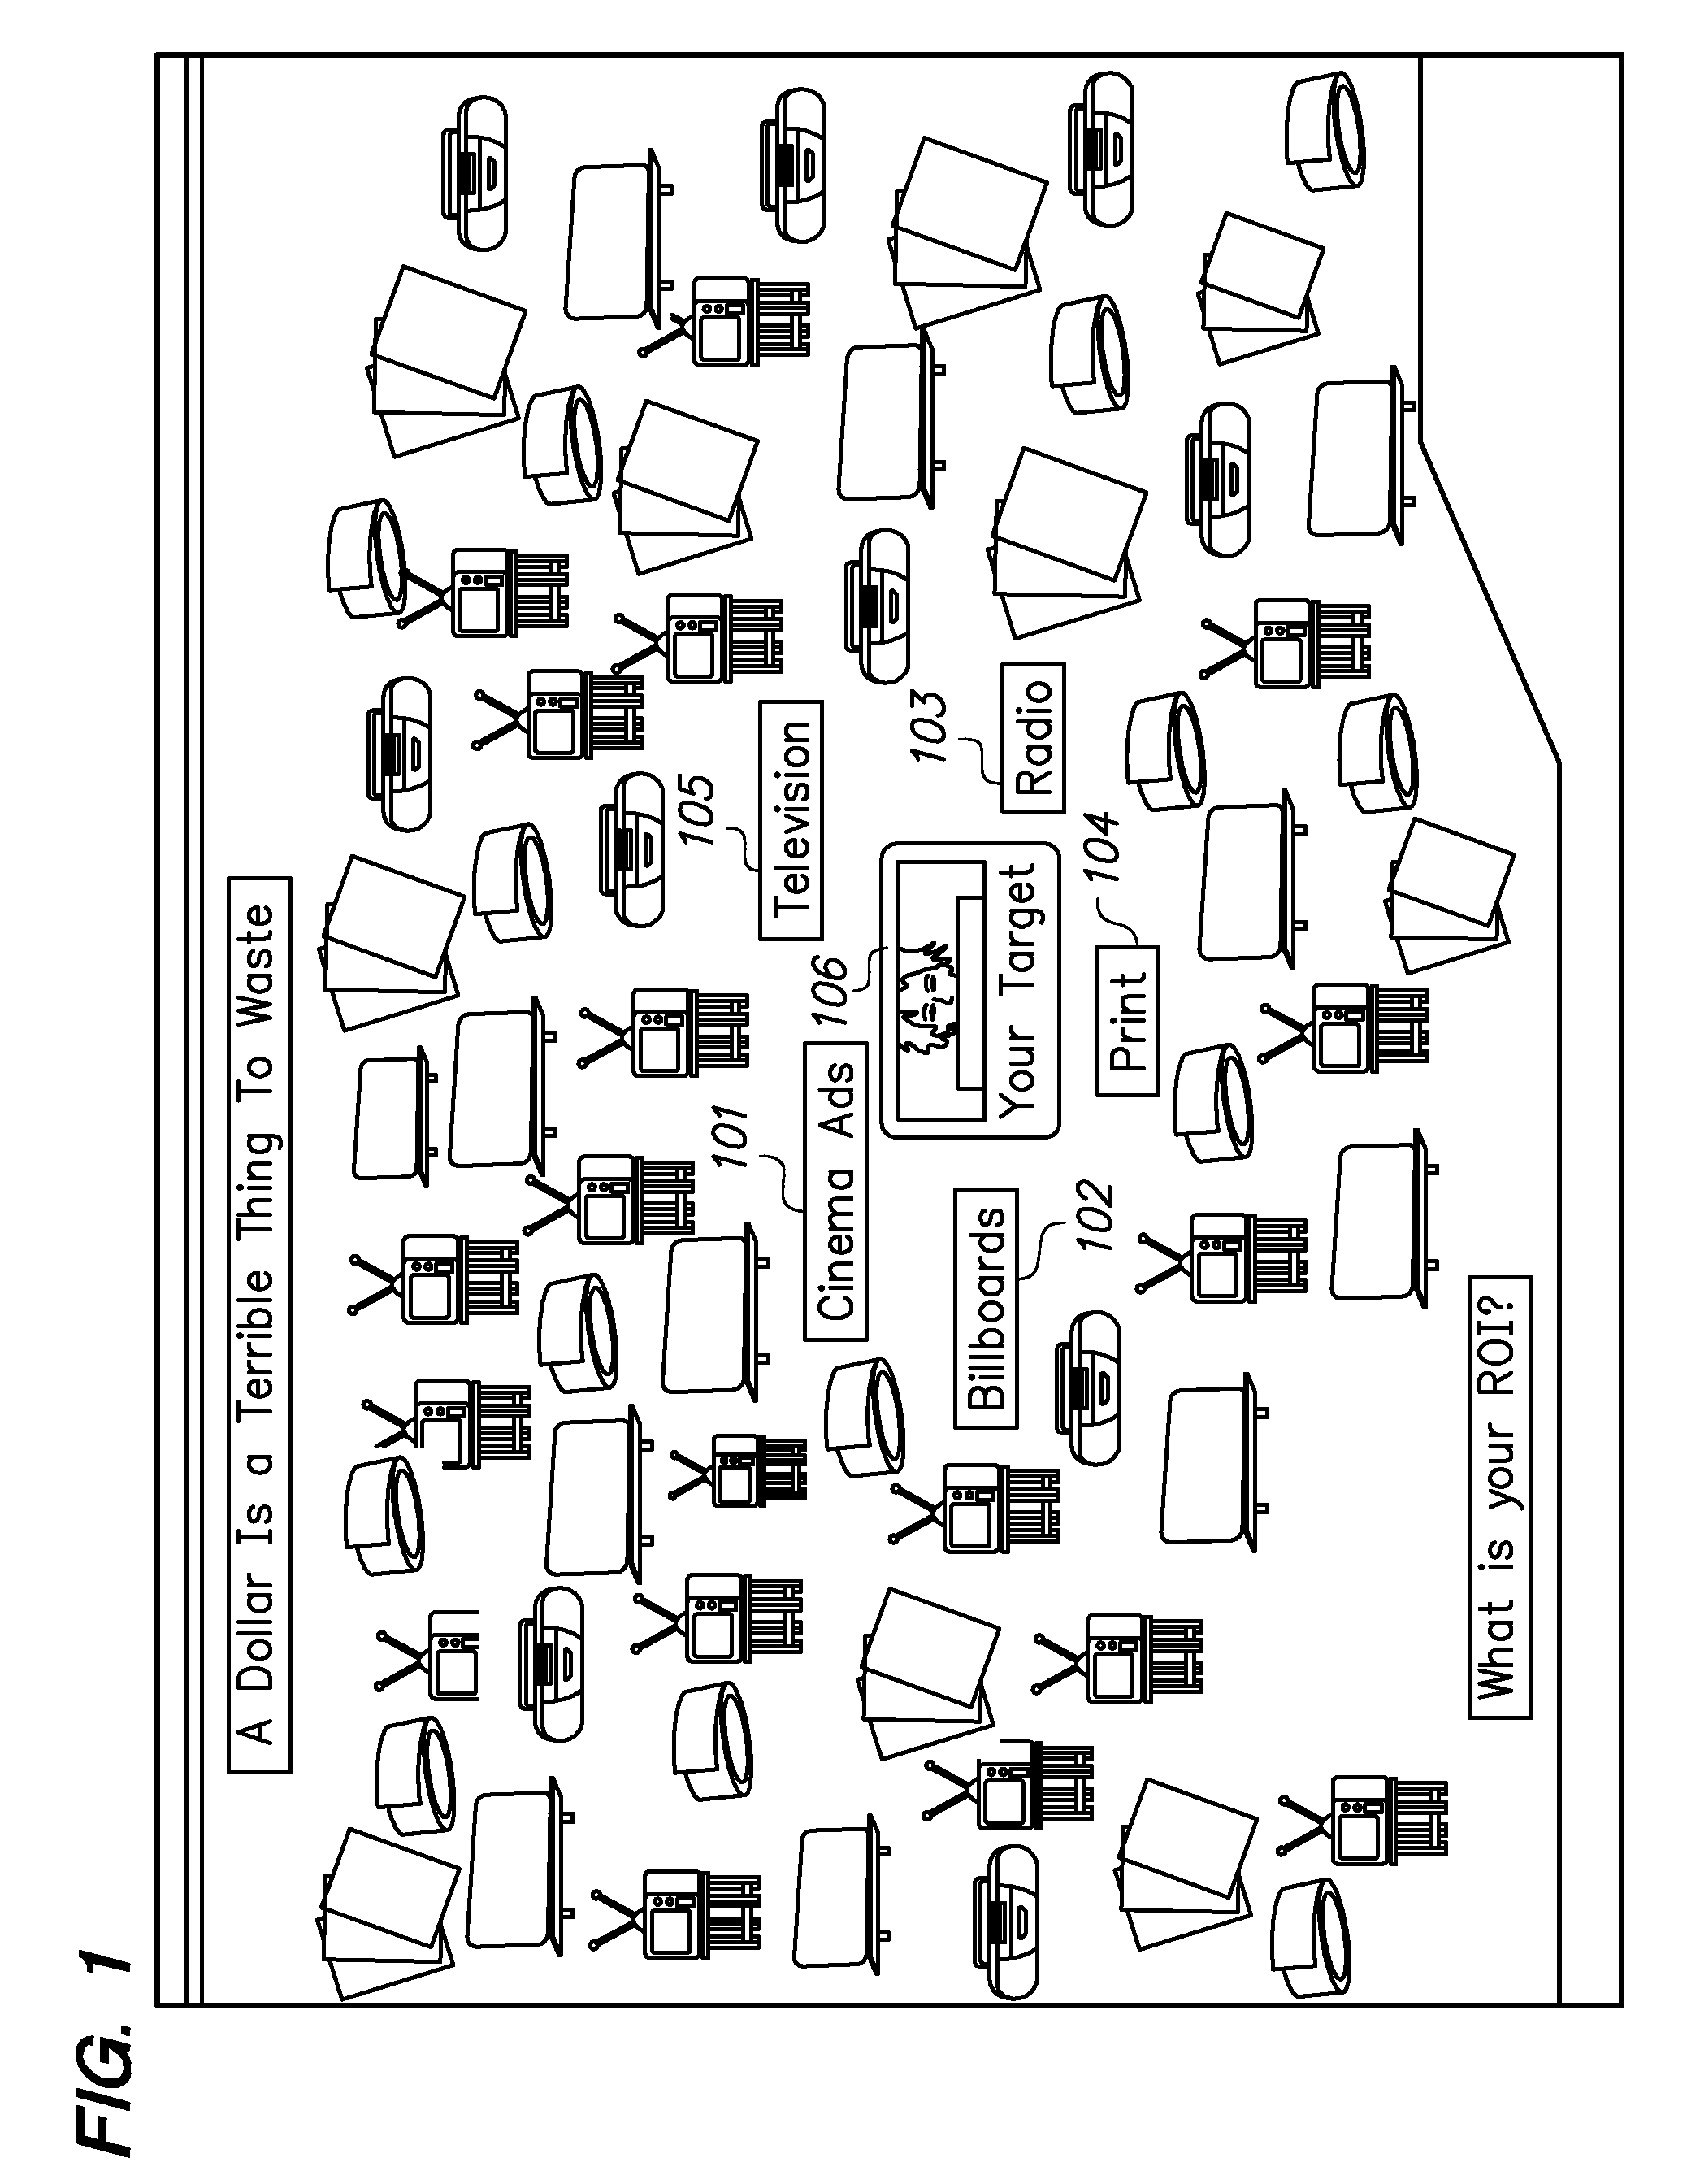 System and Method For Enabling Bi-Directional Communication Between Providers And Consumers of Information In Multi-Level Markets Using A Computer Network